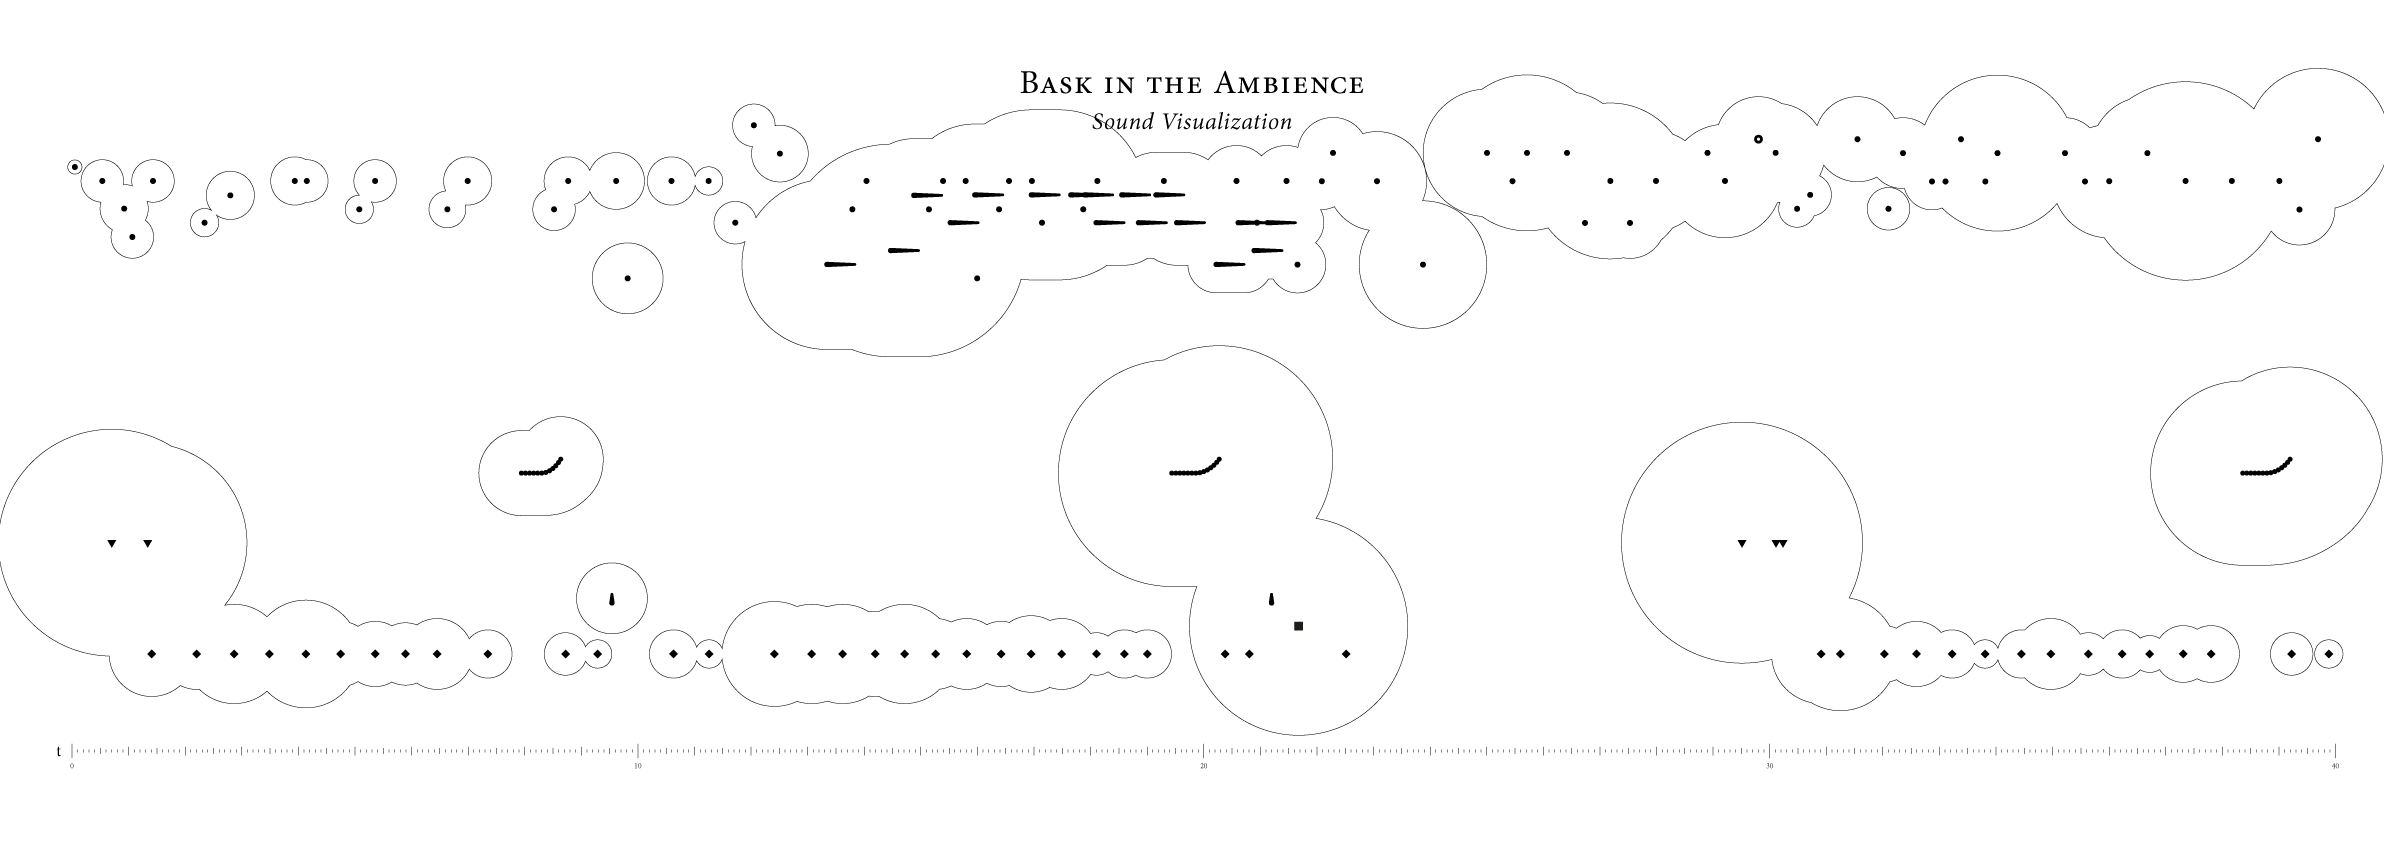 Bask in the Ambience—a Sound Visualization